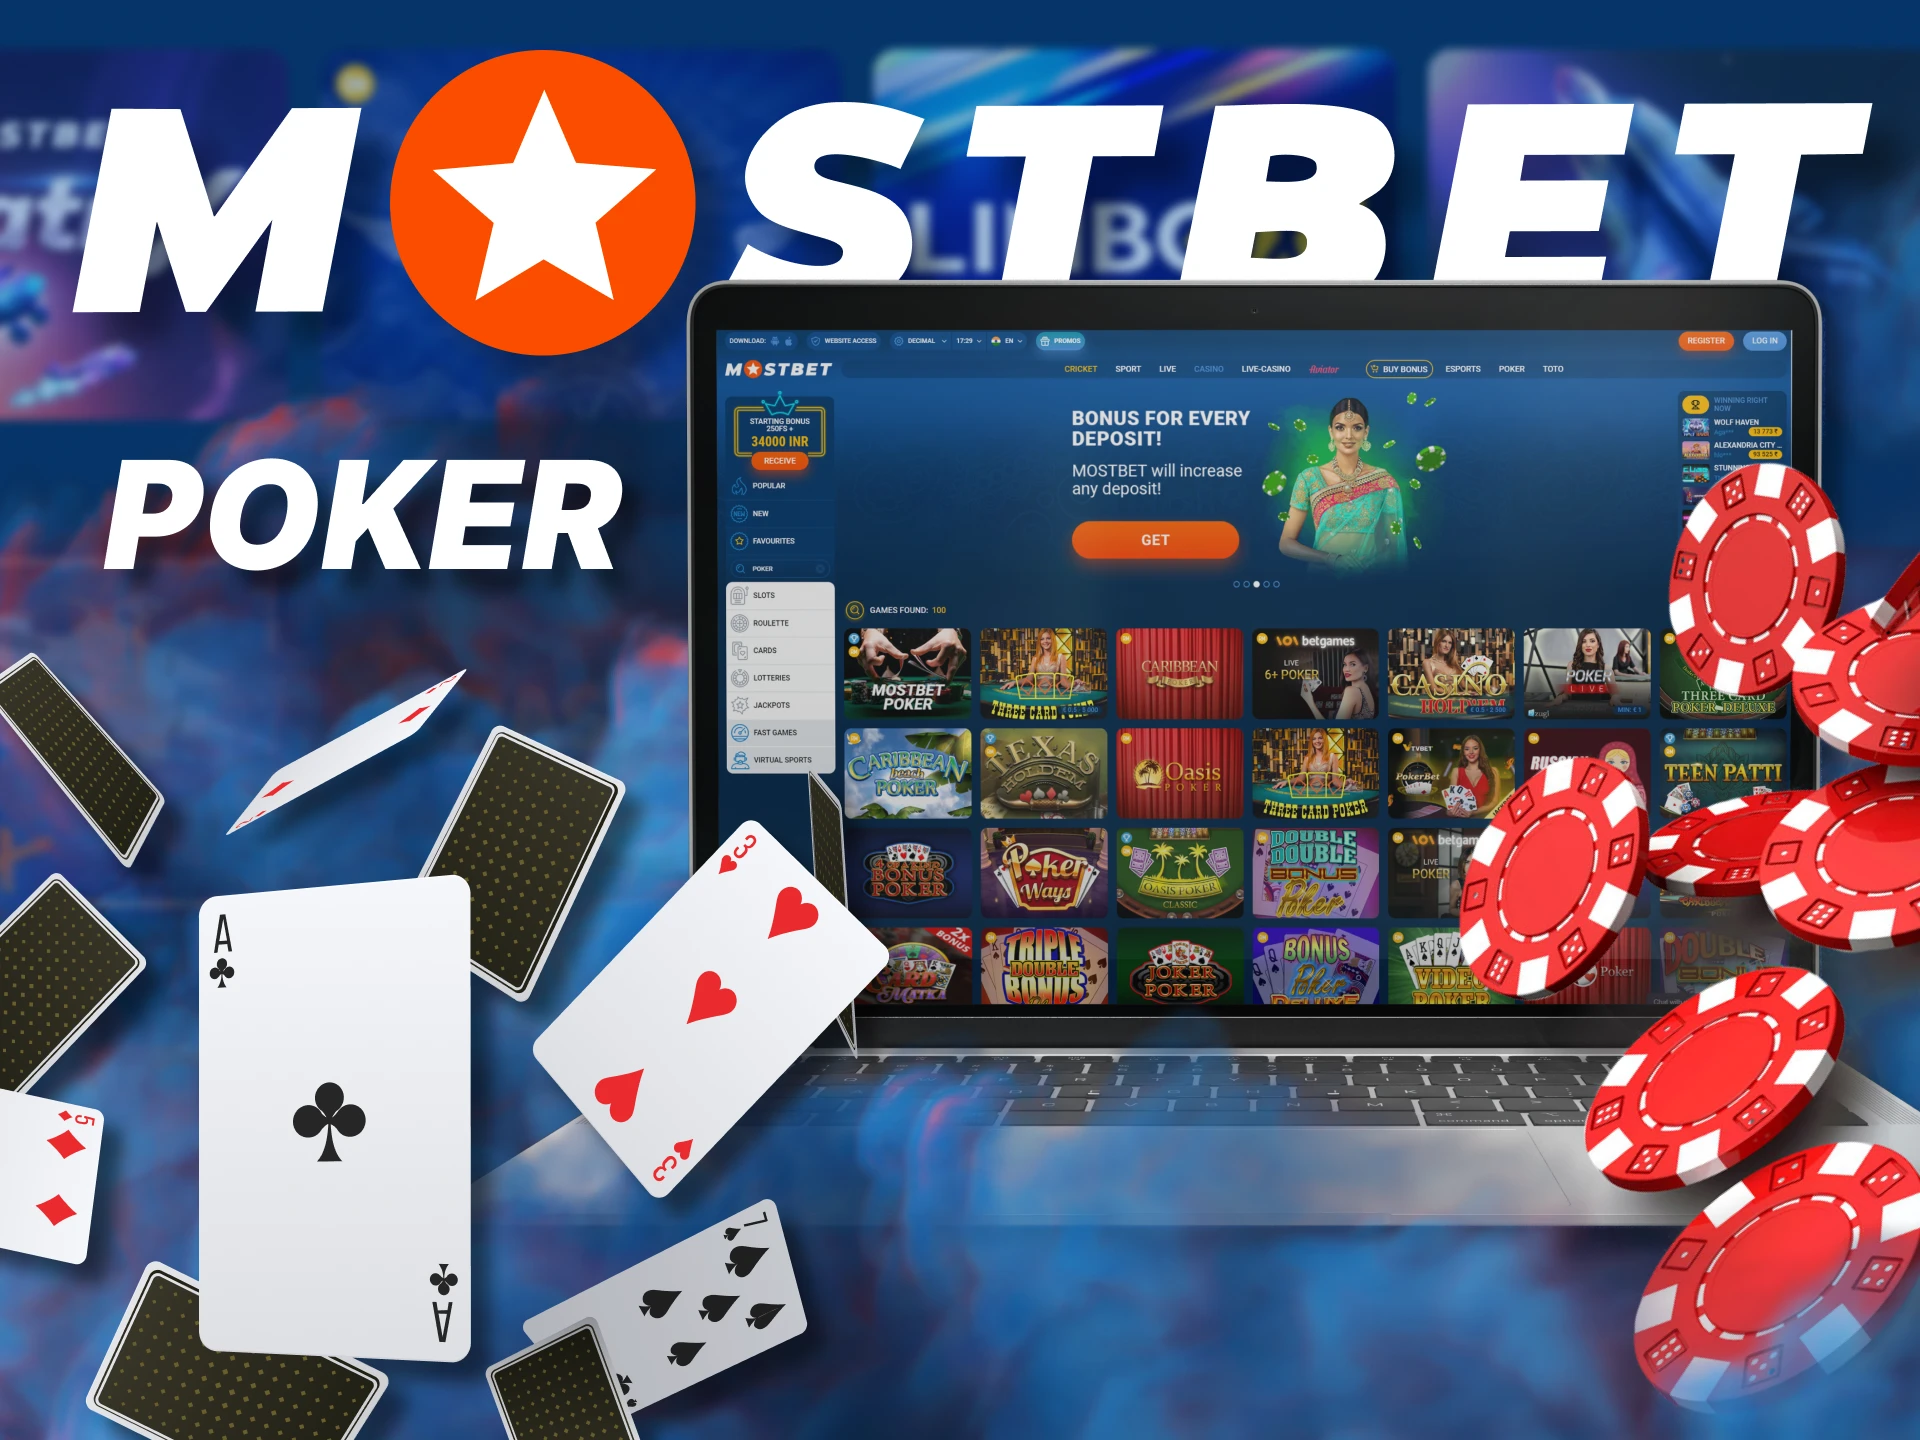 Play poker at Mostbet Casino.